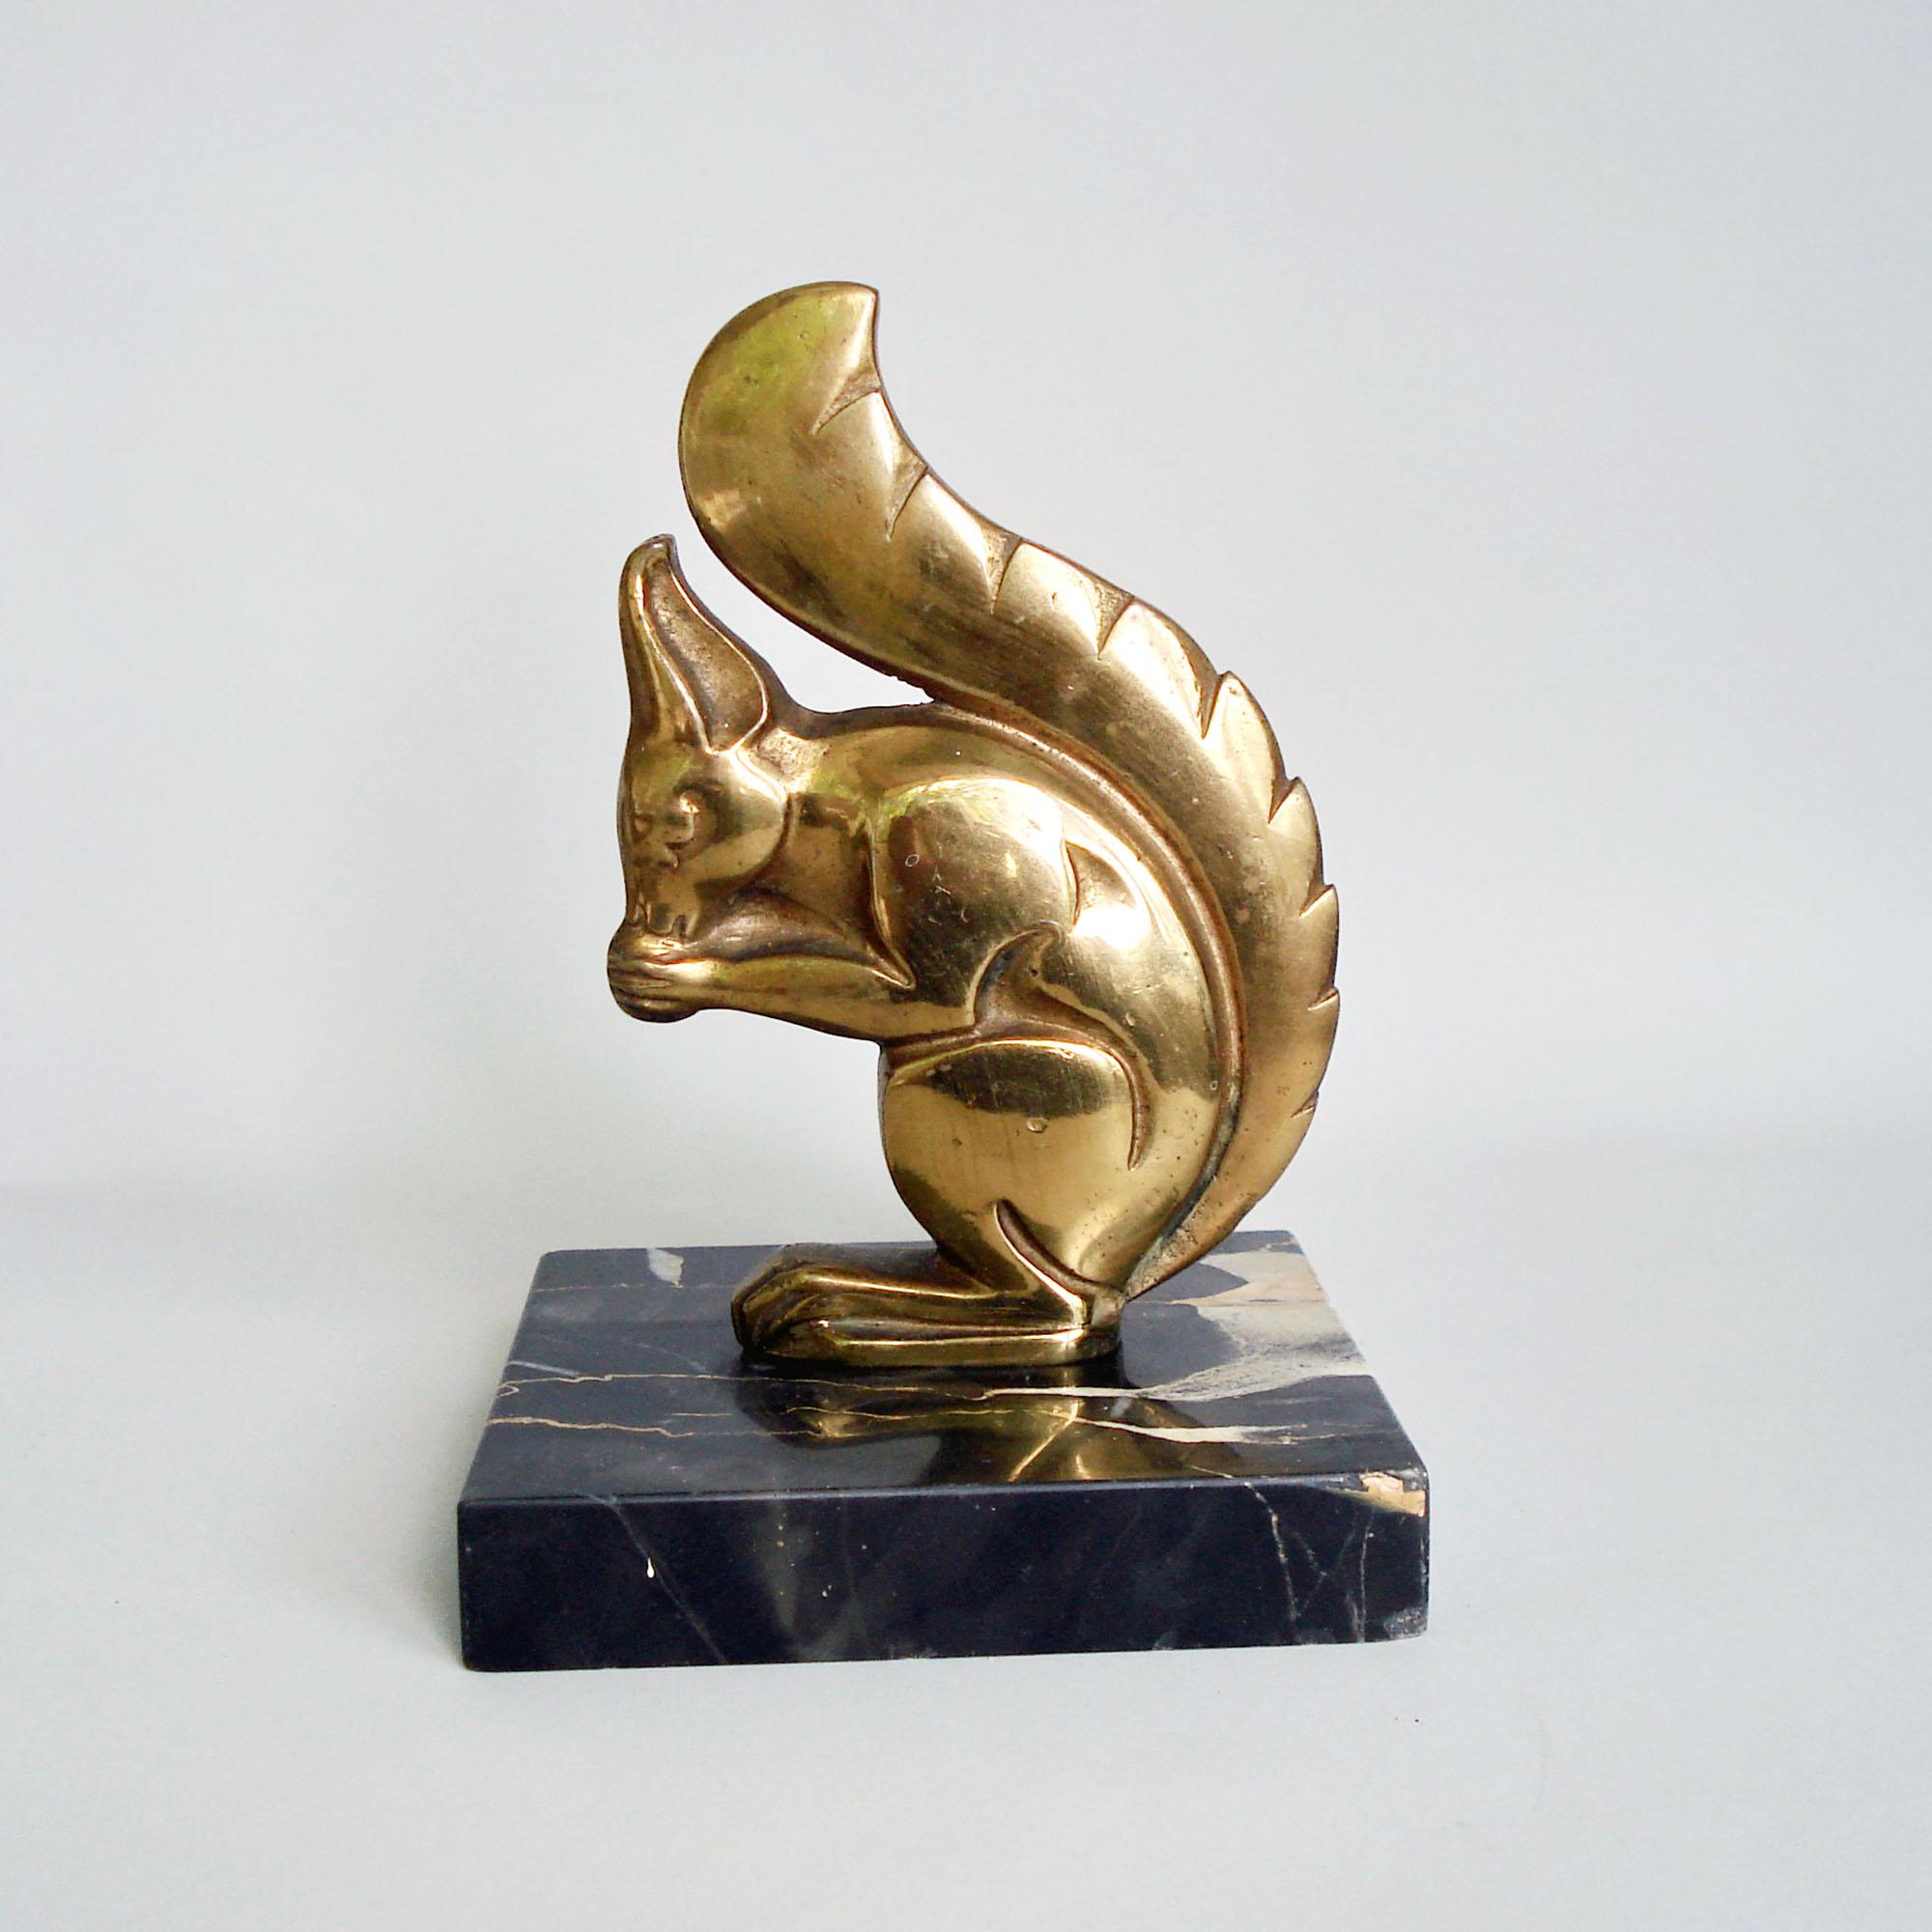 Beautiful Art Deco bronze figurine depicting a squirrel eating a nut, designed by Jan Johannes Bosma, The Netherlands, circa 1925.
Golden patinated bronze on Belgium marble, beautiful original condition, some wear of time, few scratches to the